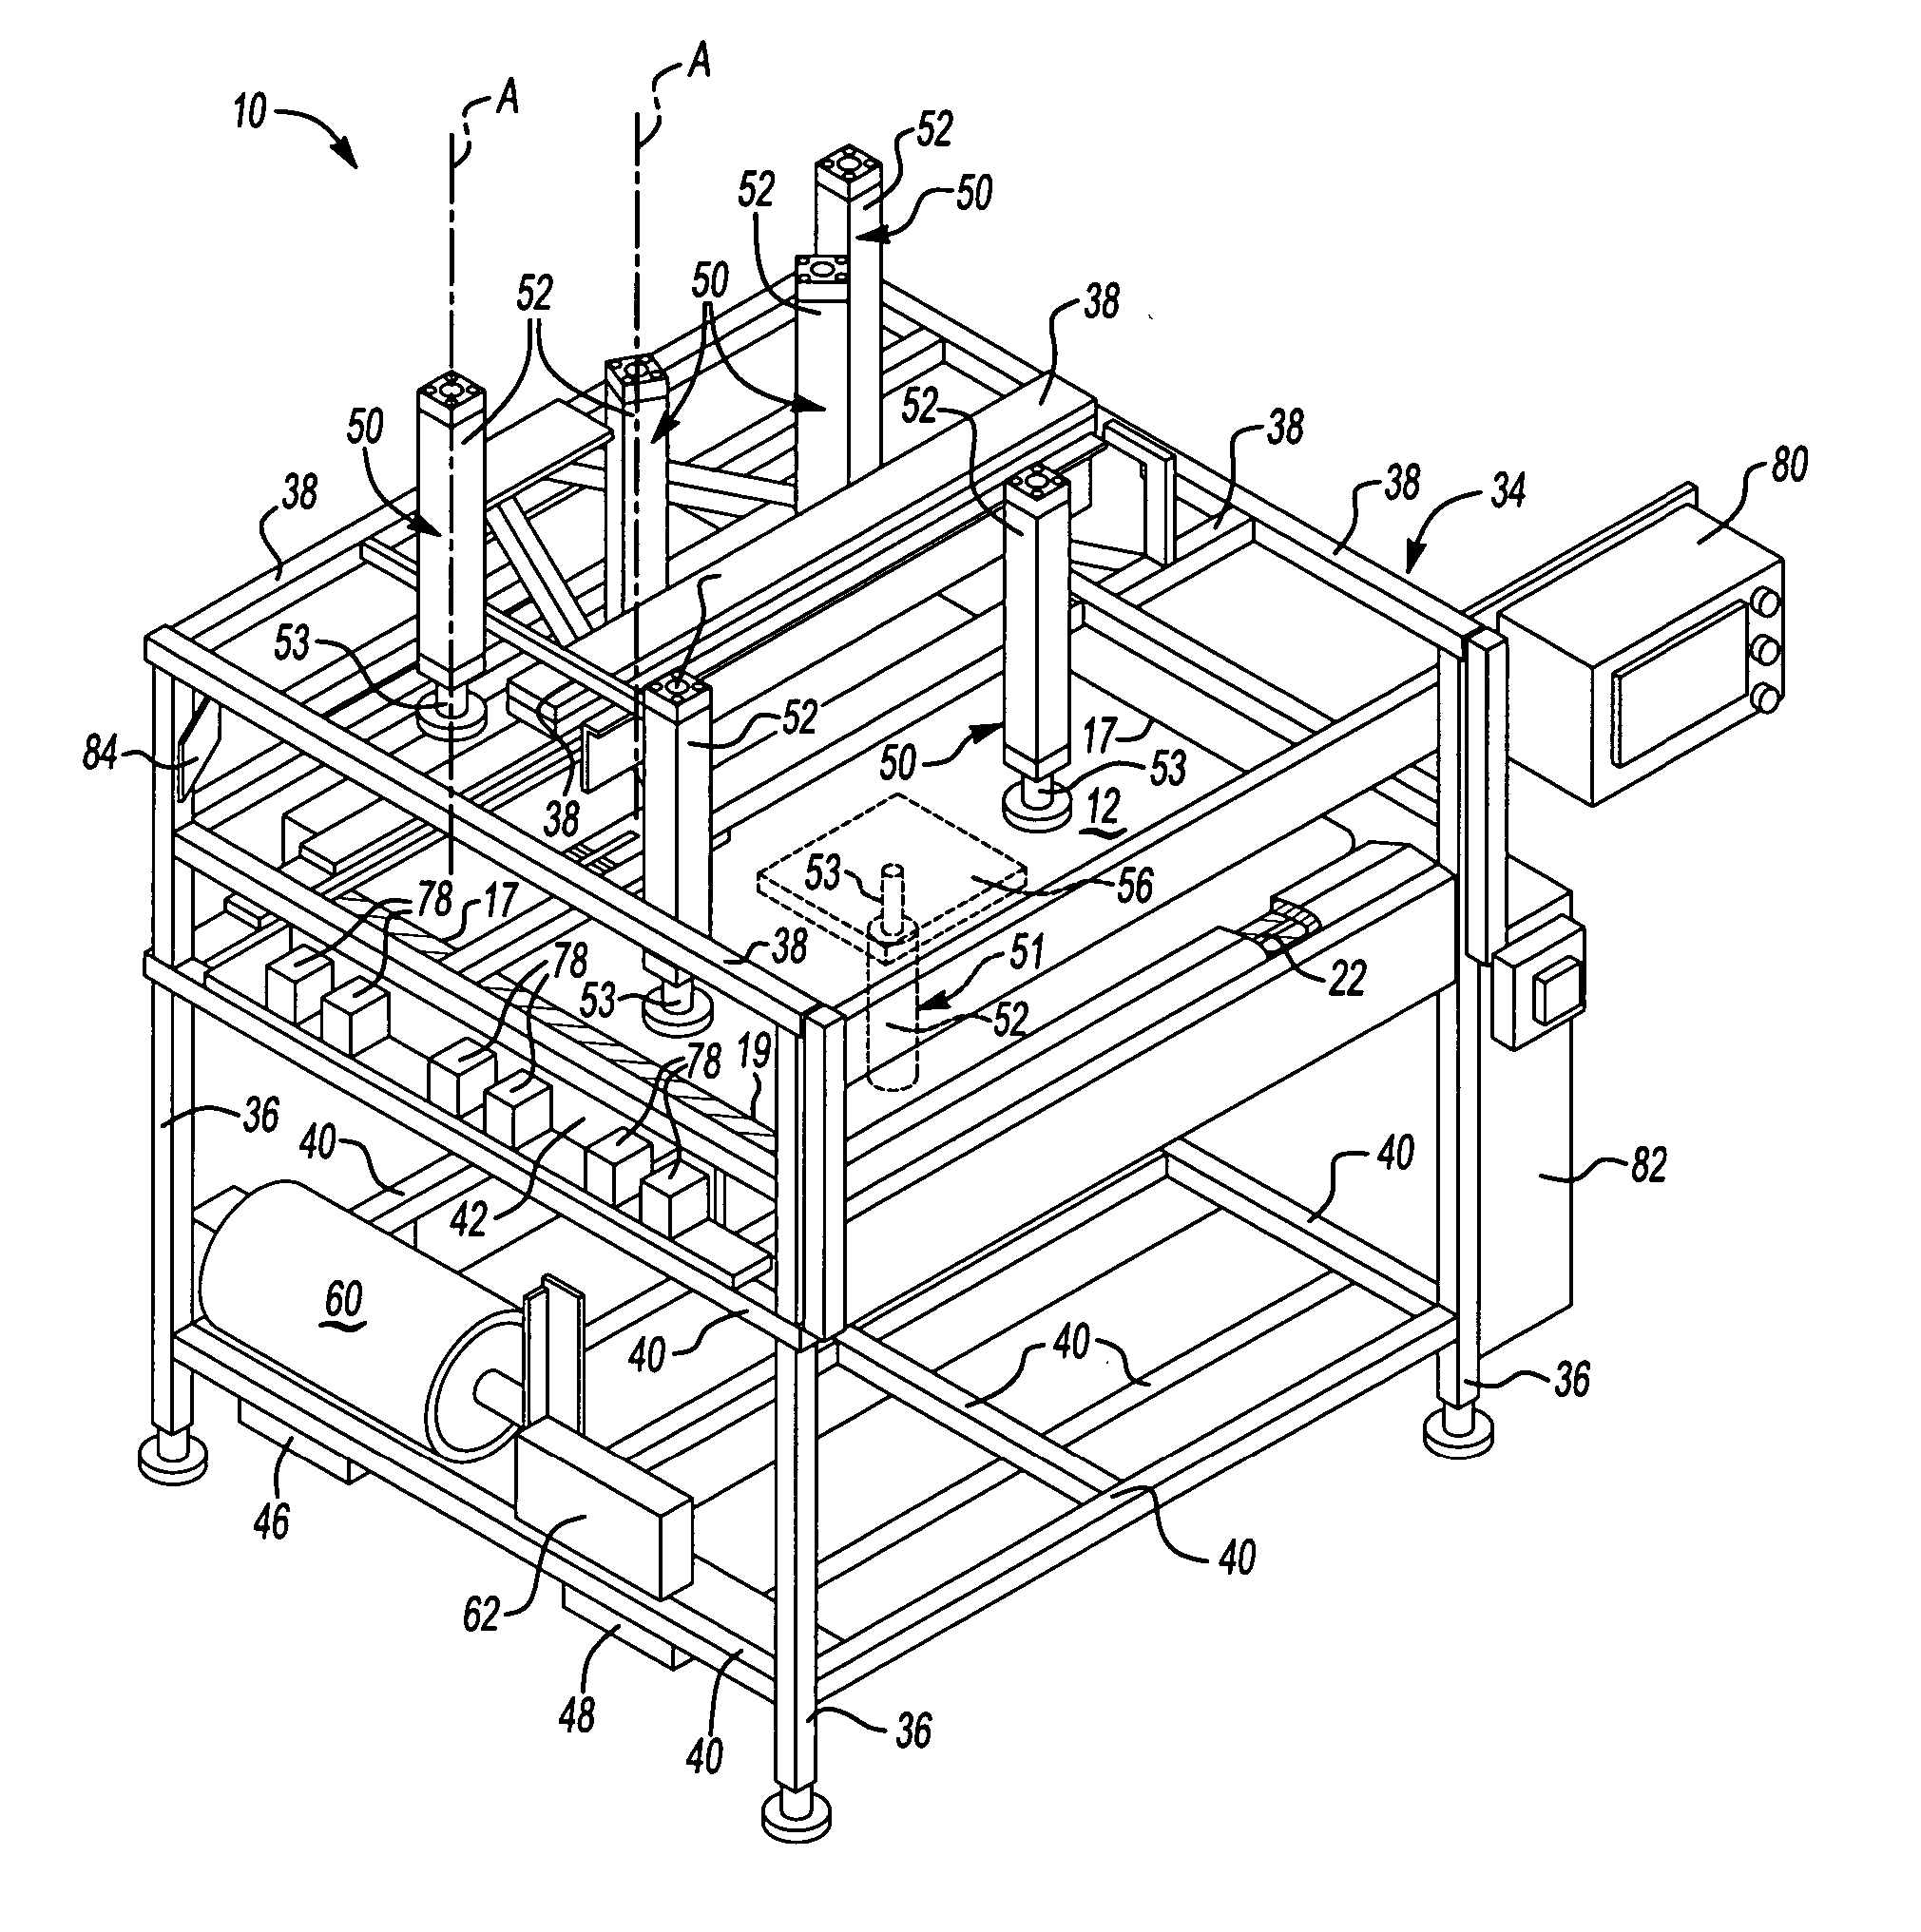 Apparatus for forming a part for an automotive vehicle